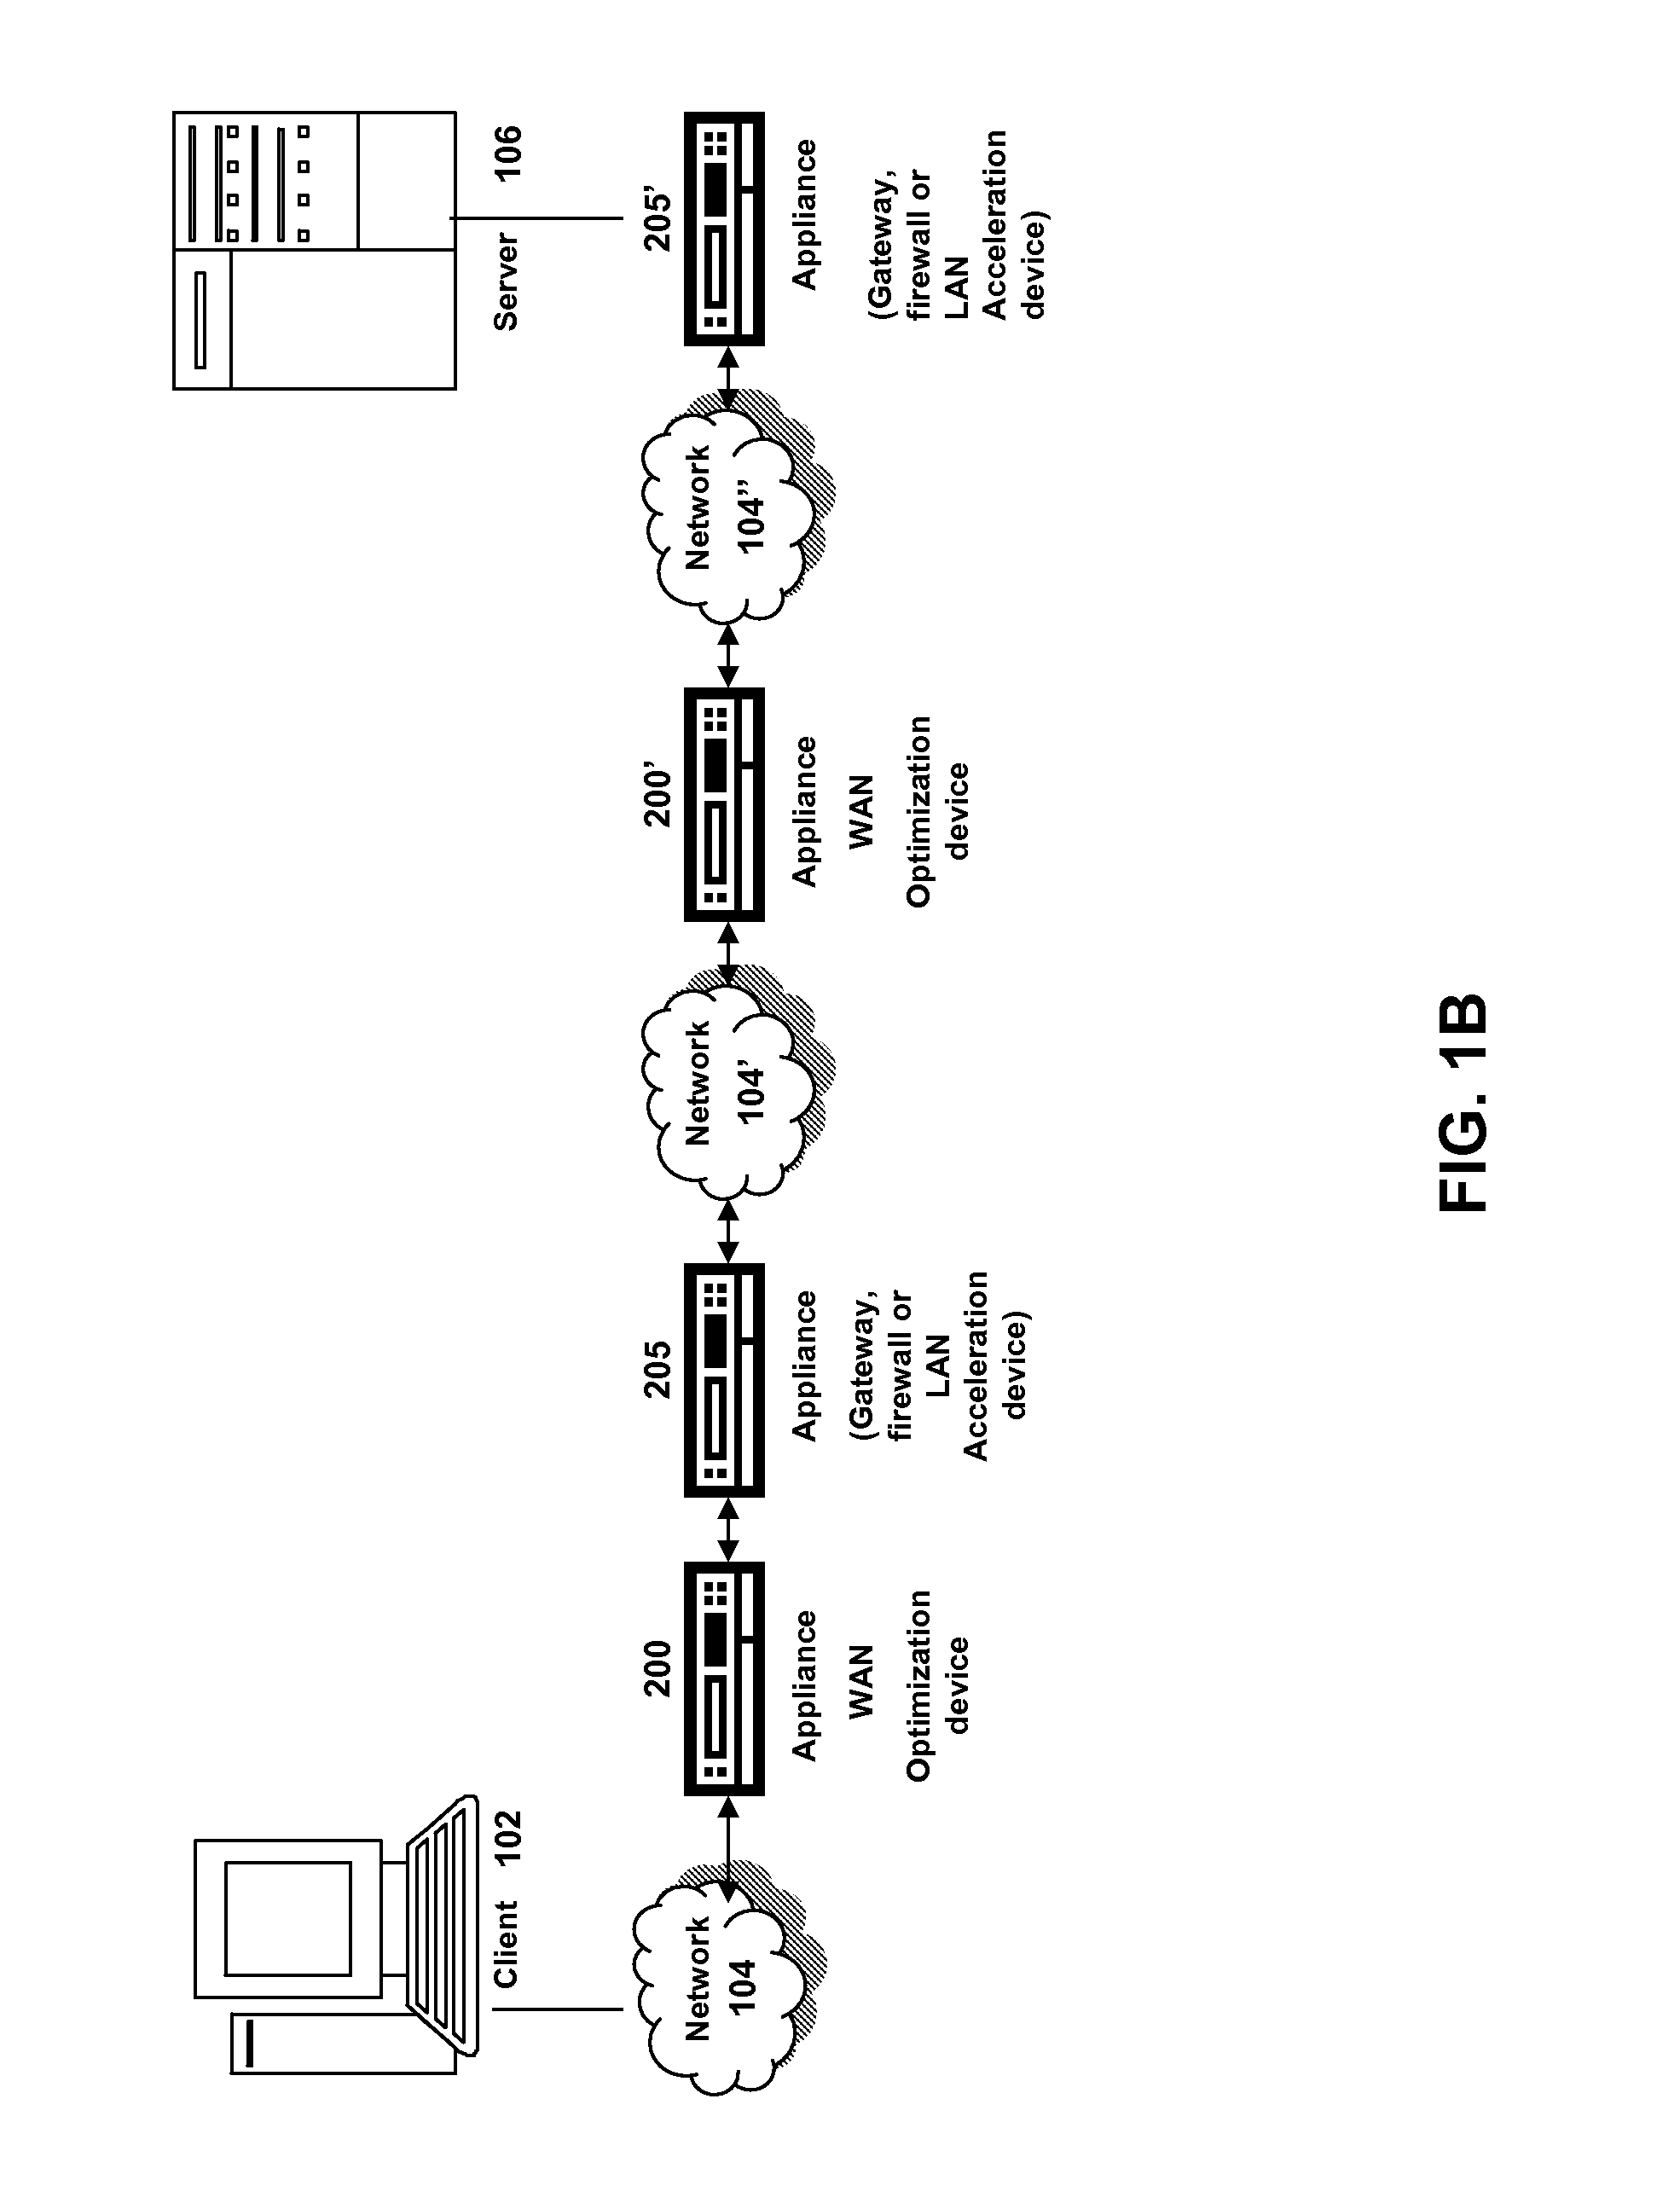 Systems and methods for providing virtual fair queueing of network traffic